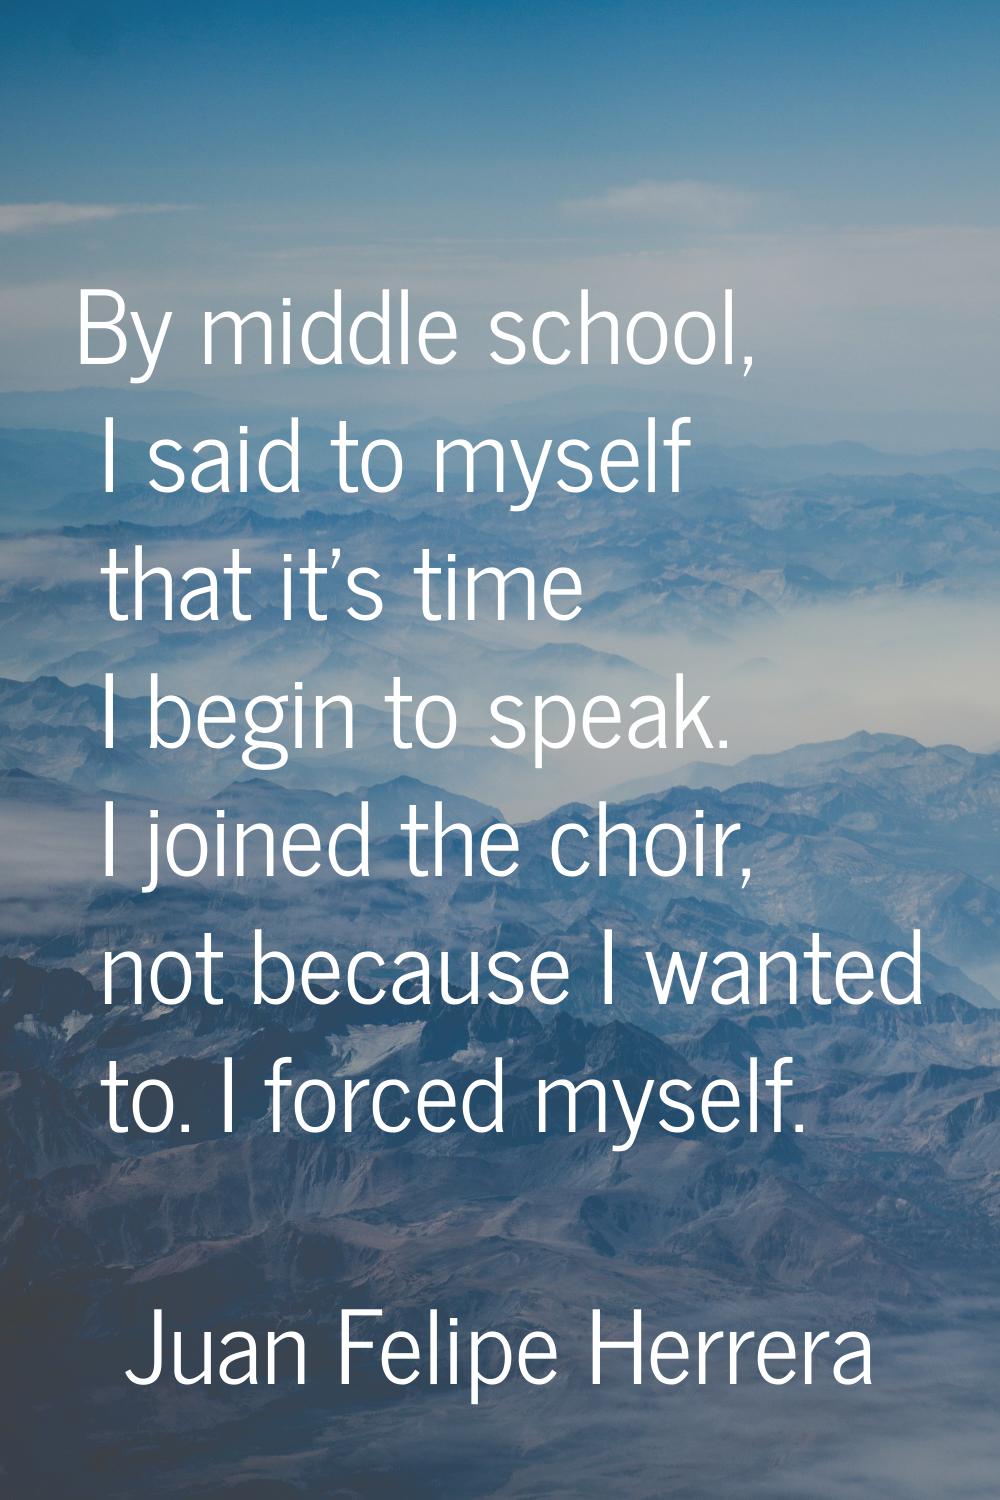 By middle school, I said to myself that it's time I begin to speak. I joined the choir, not because